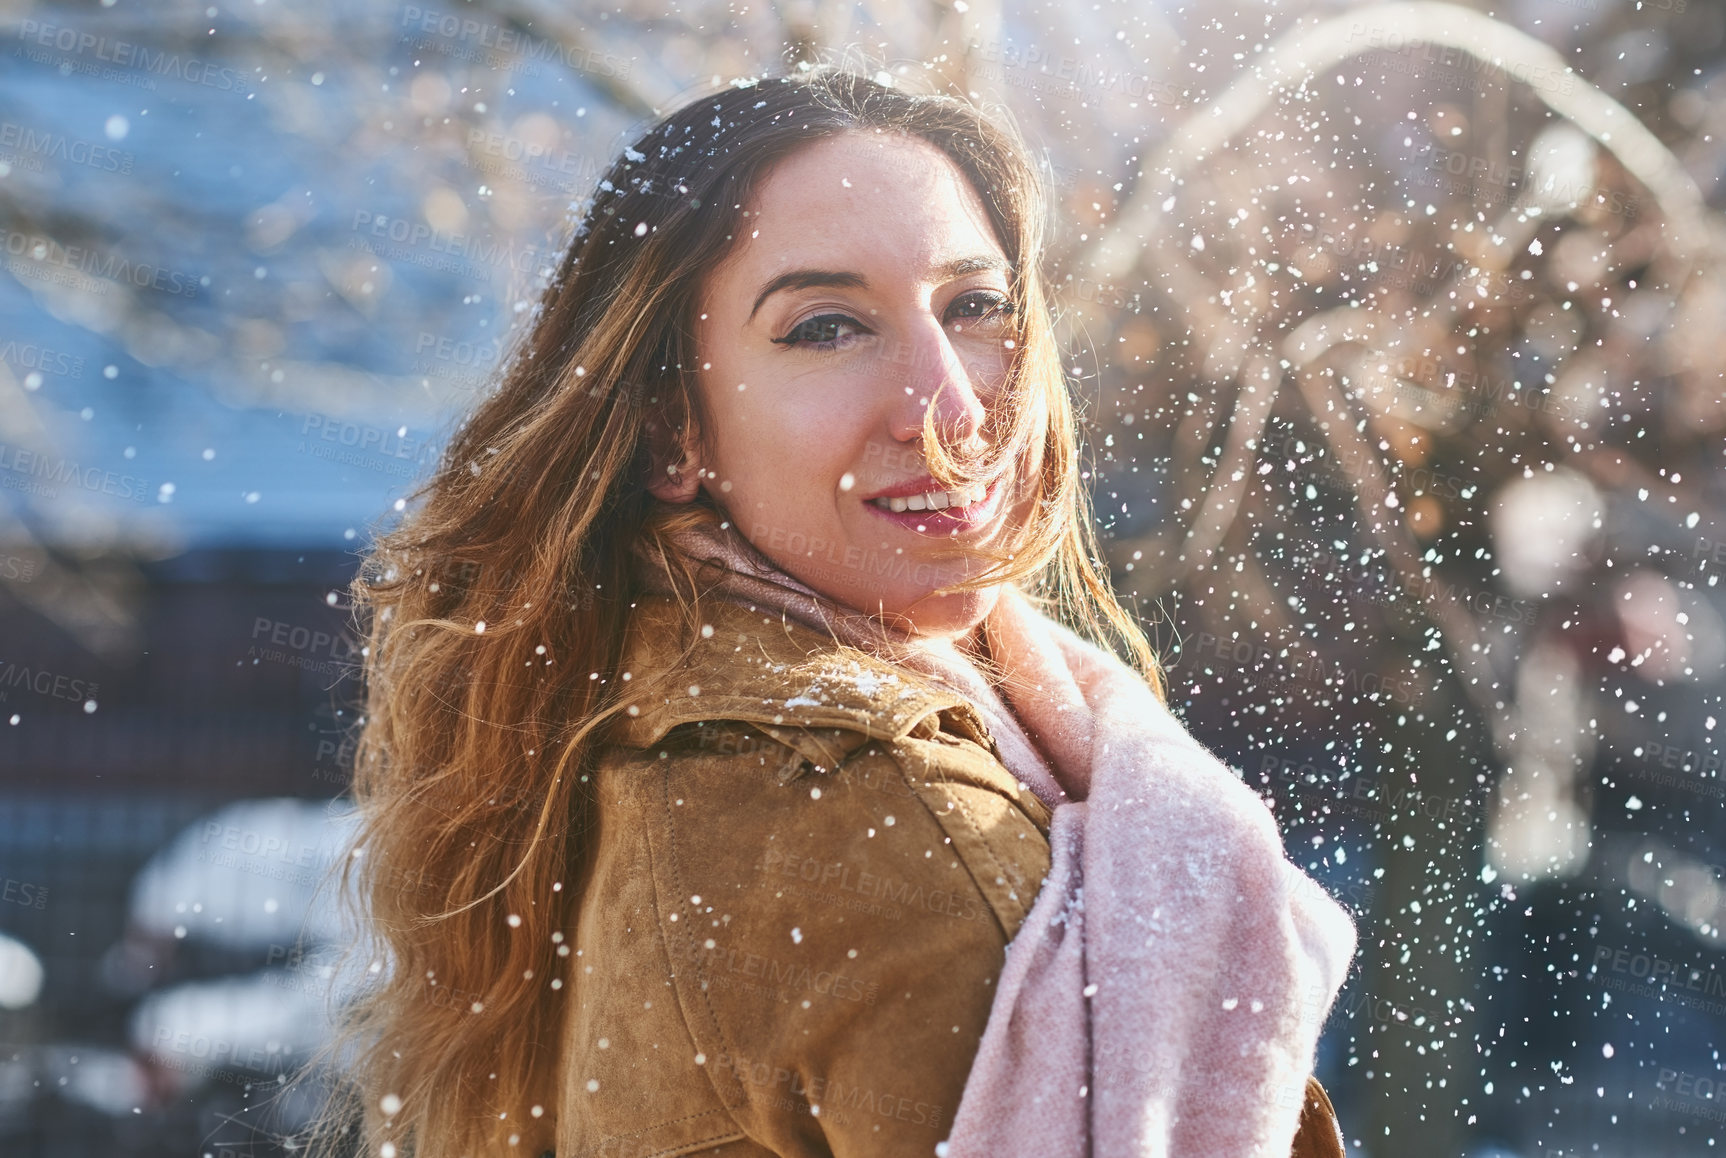 Buy stock photo Shot of an attractive young woman enjoying being out in the snow